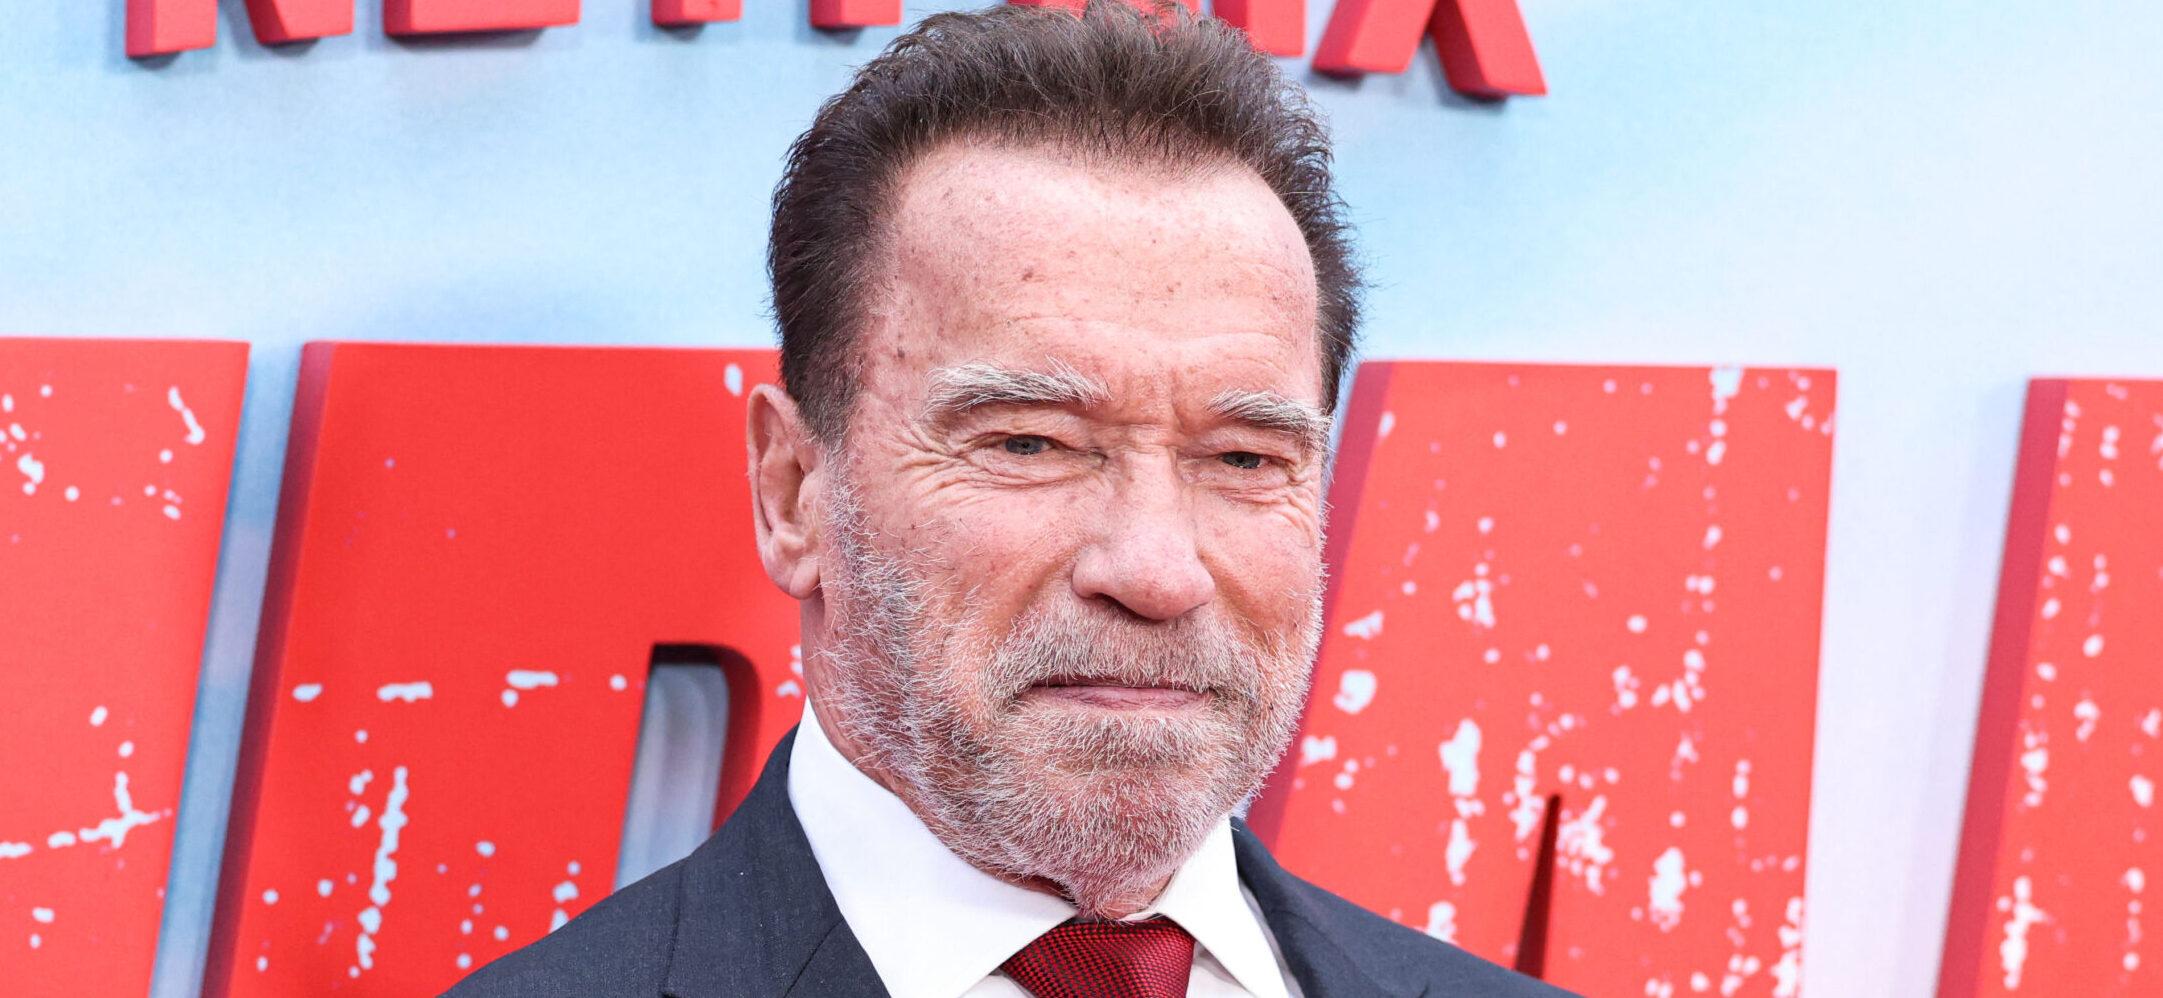 Arnold Schwarzenegger Celebrates 40th Anniversary As American Citizen With Touching Video